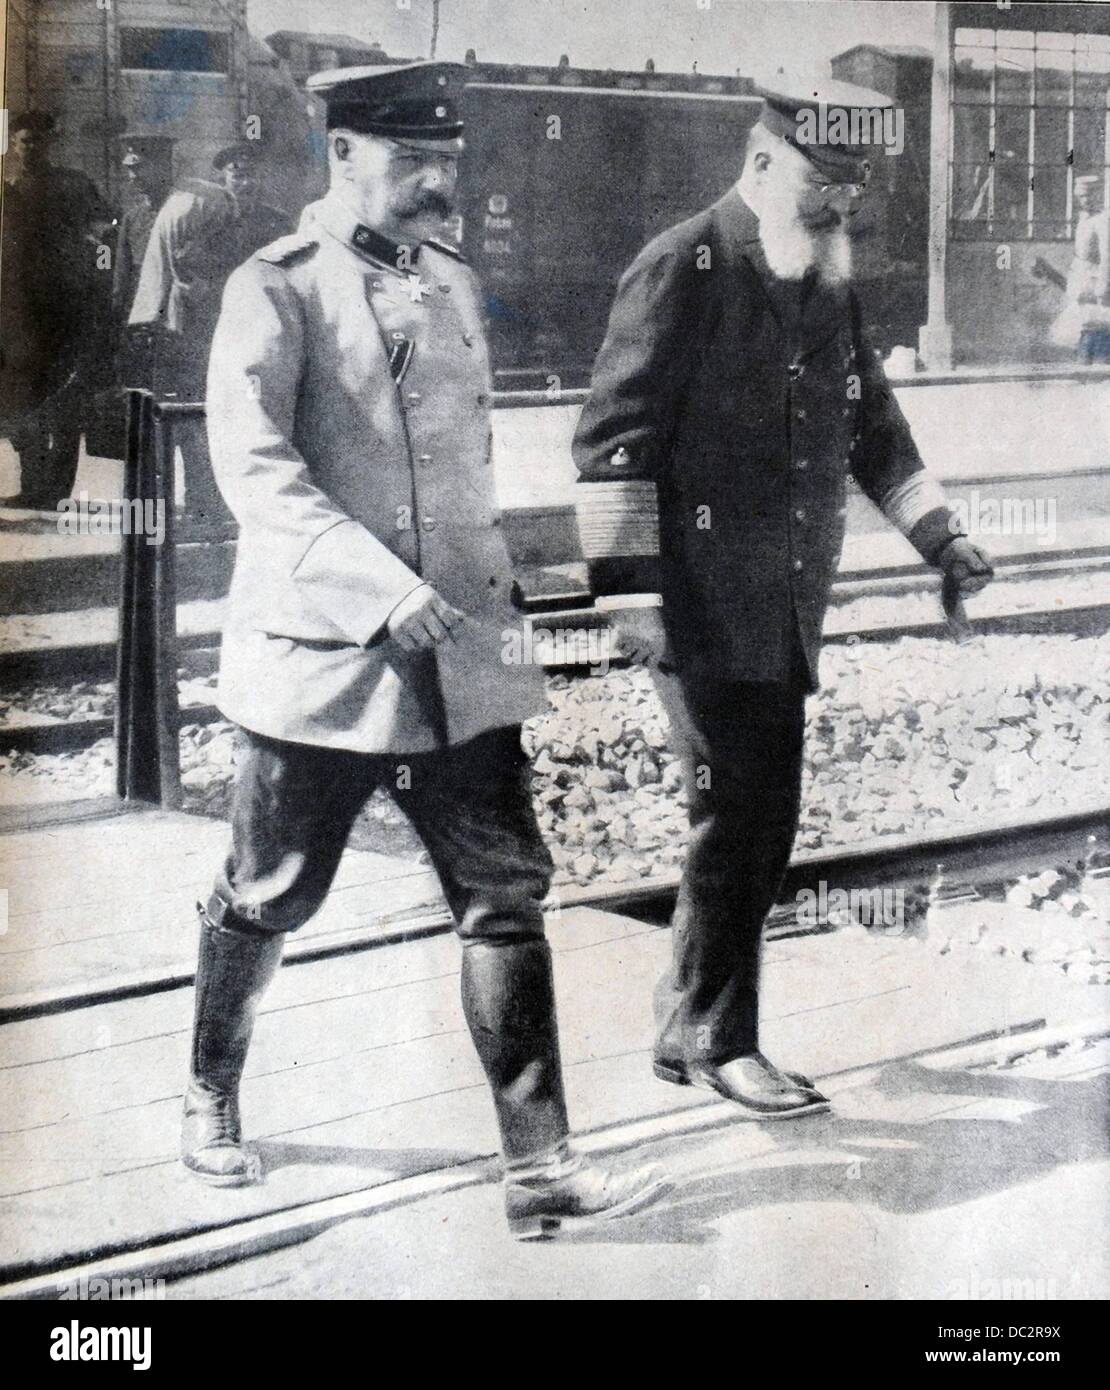 The image on the cover of the Berliner Illustrirte Zeitung (Berlin Illustrated Newspaper) published in 1915 shows Field Marshal Paul von Hindenburg and Admiral Alfred von Tirpitz. The original caption read: 'Admiral von Tirpitz visits Field Marshal von Hindenburg.' Photo: Berliner Verlag/Archiv Stock Photo